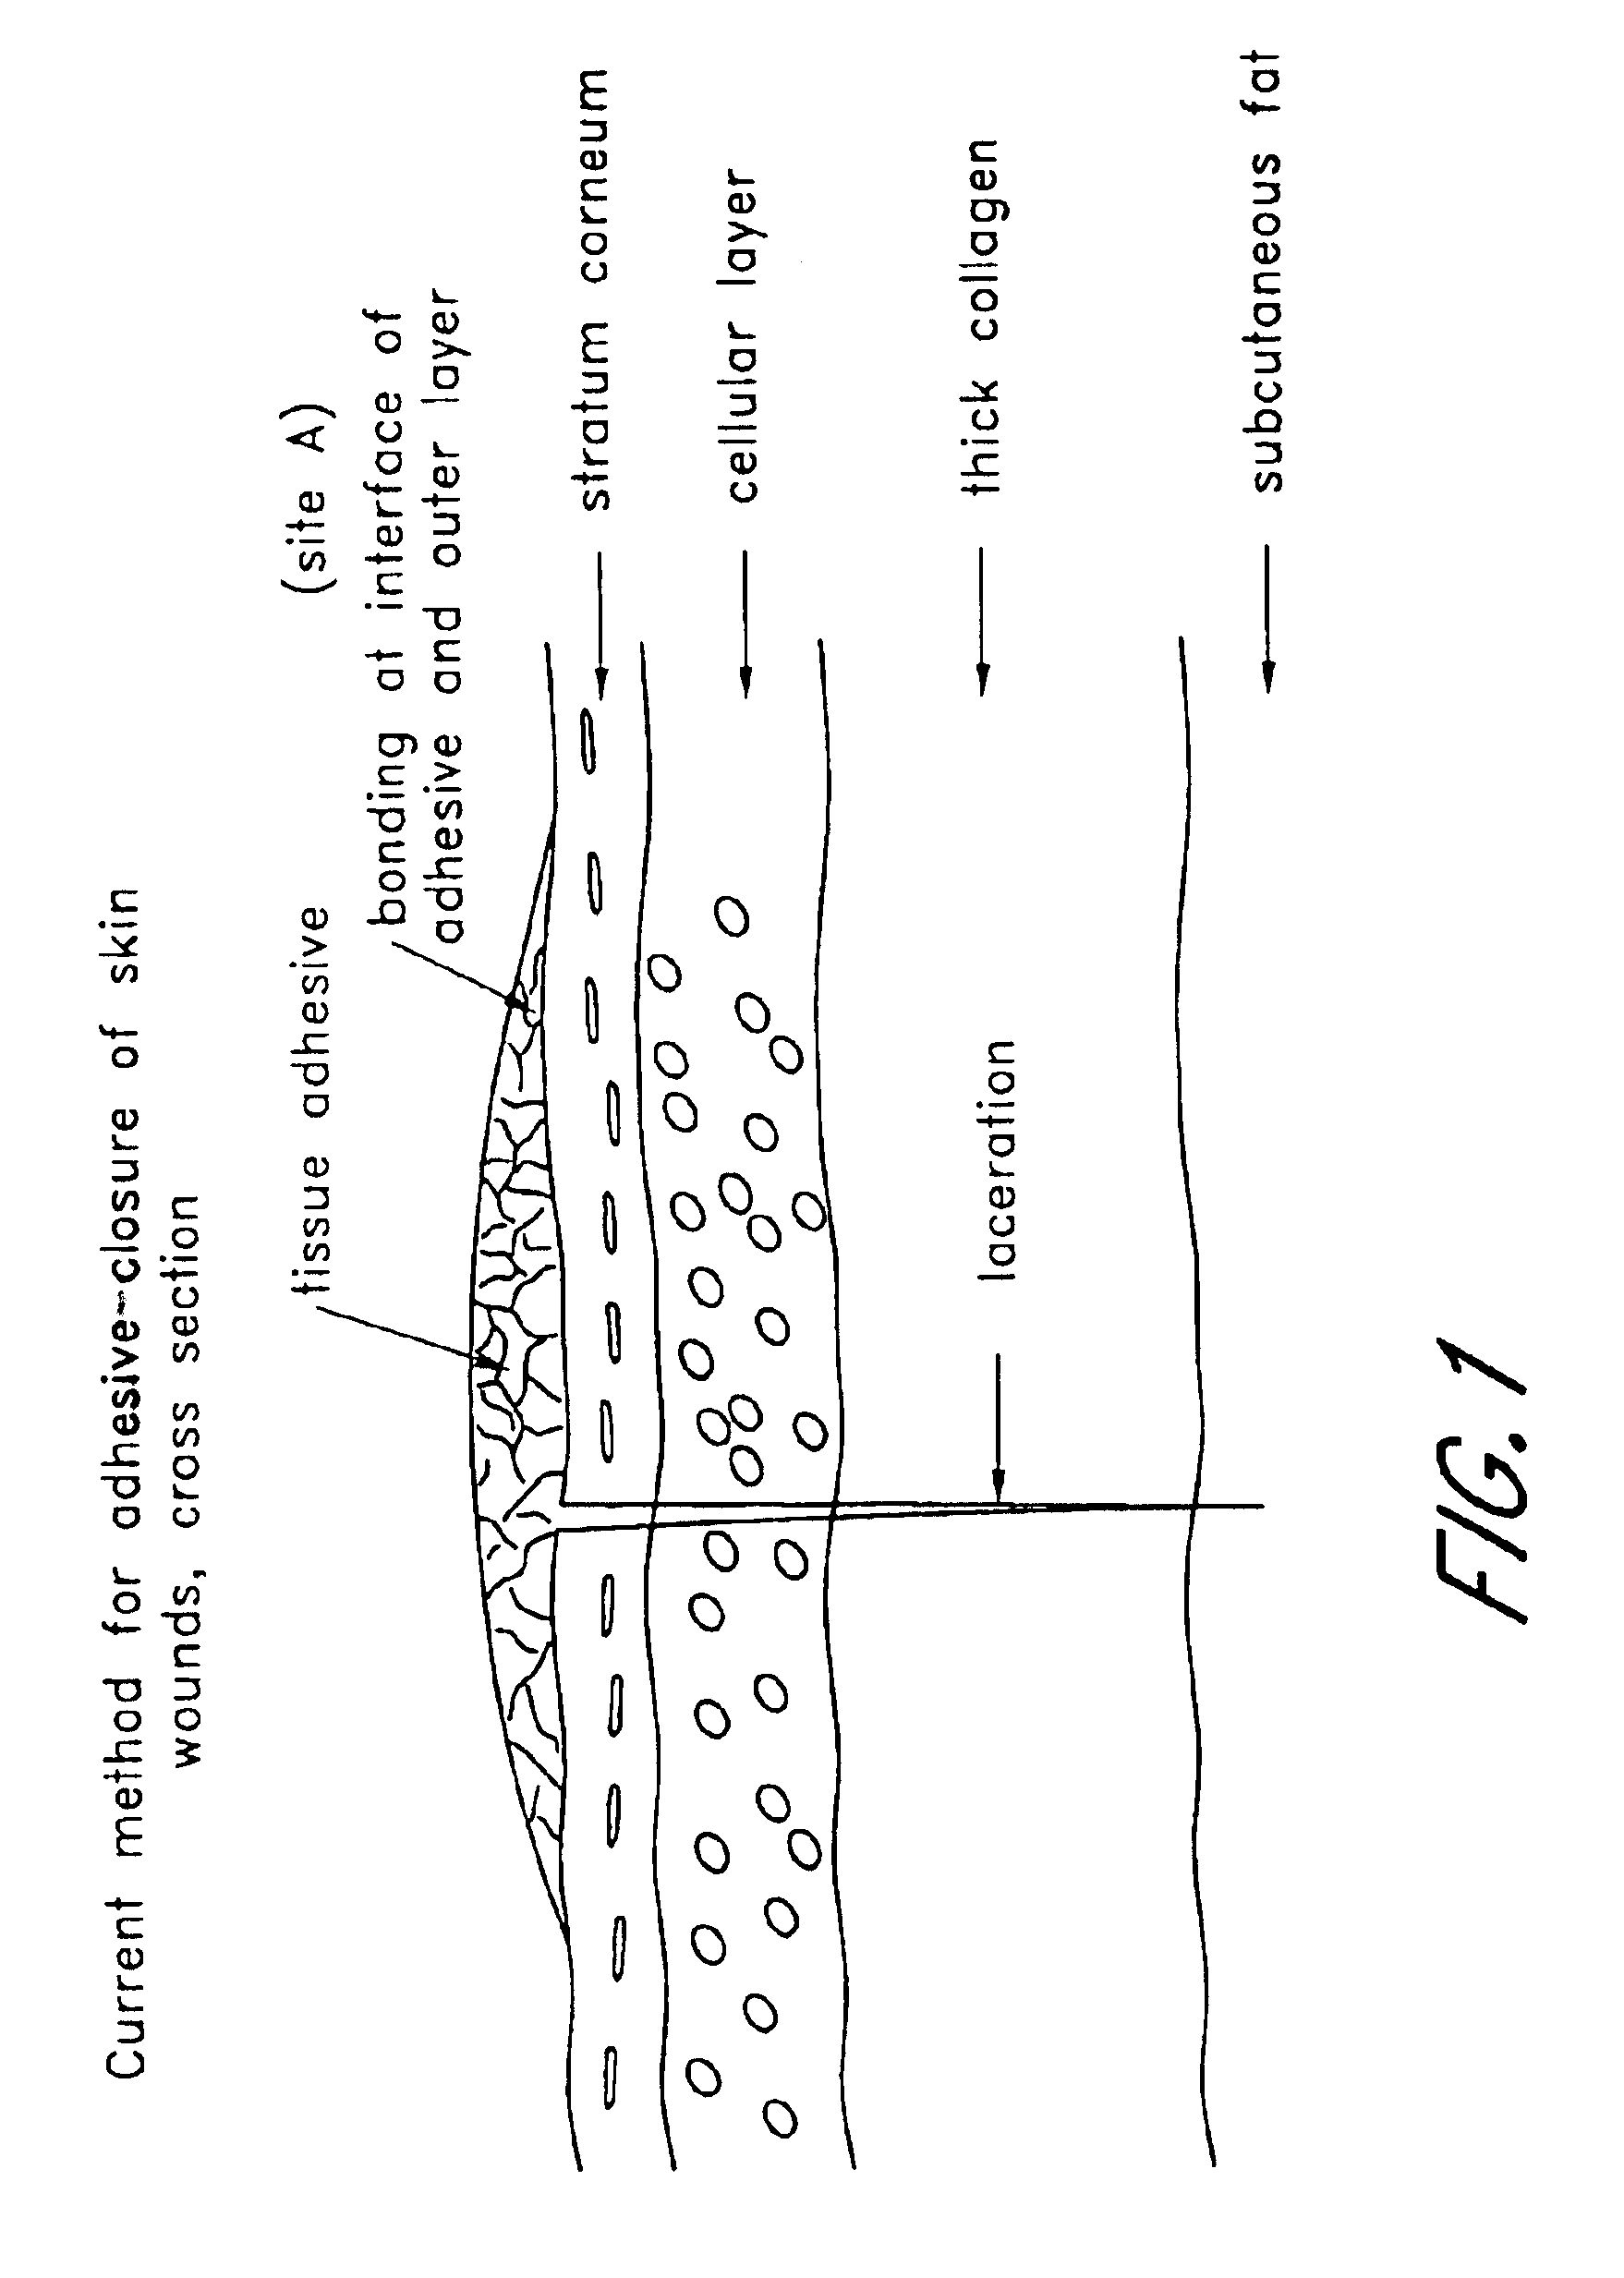 Adhesive including medicament and device and method for applying same